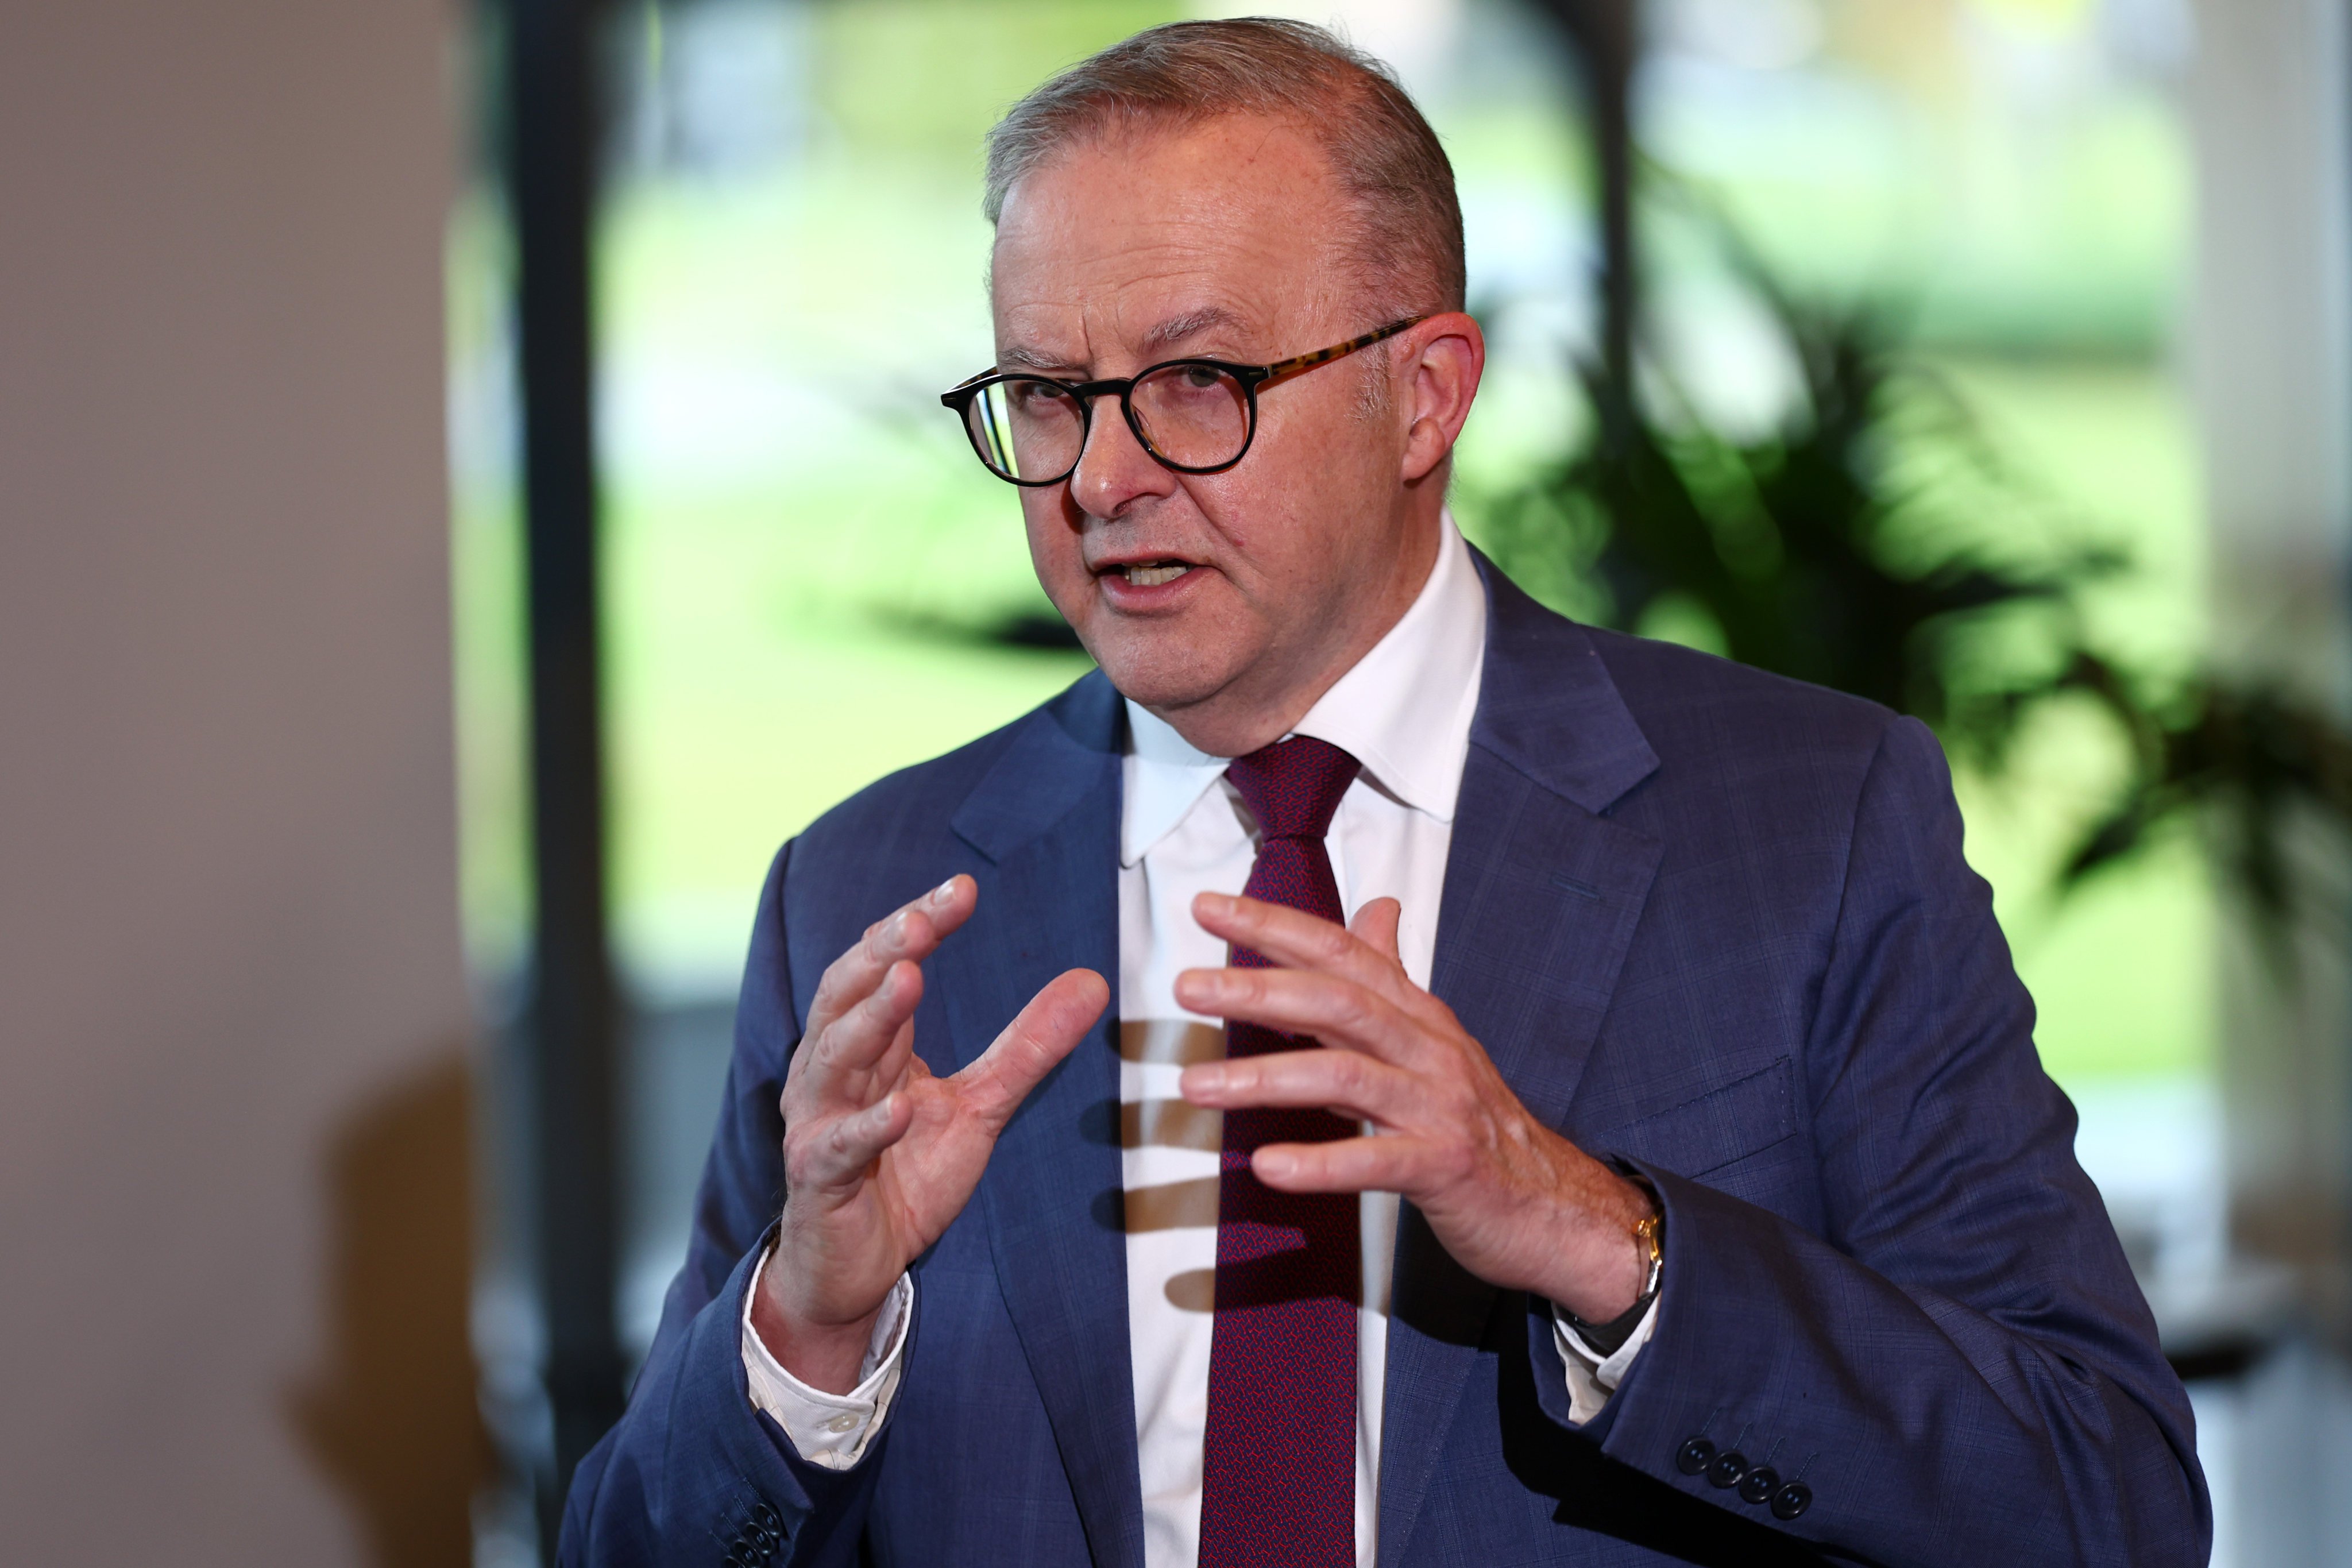 Australian Prime Minister Anthony Albanese said on Tuesday there are “no plans” to expand Aukus beyond its three founding members. Photo: AAP/dpa